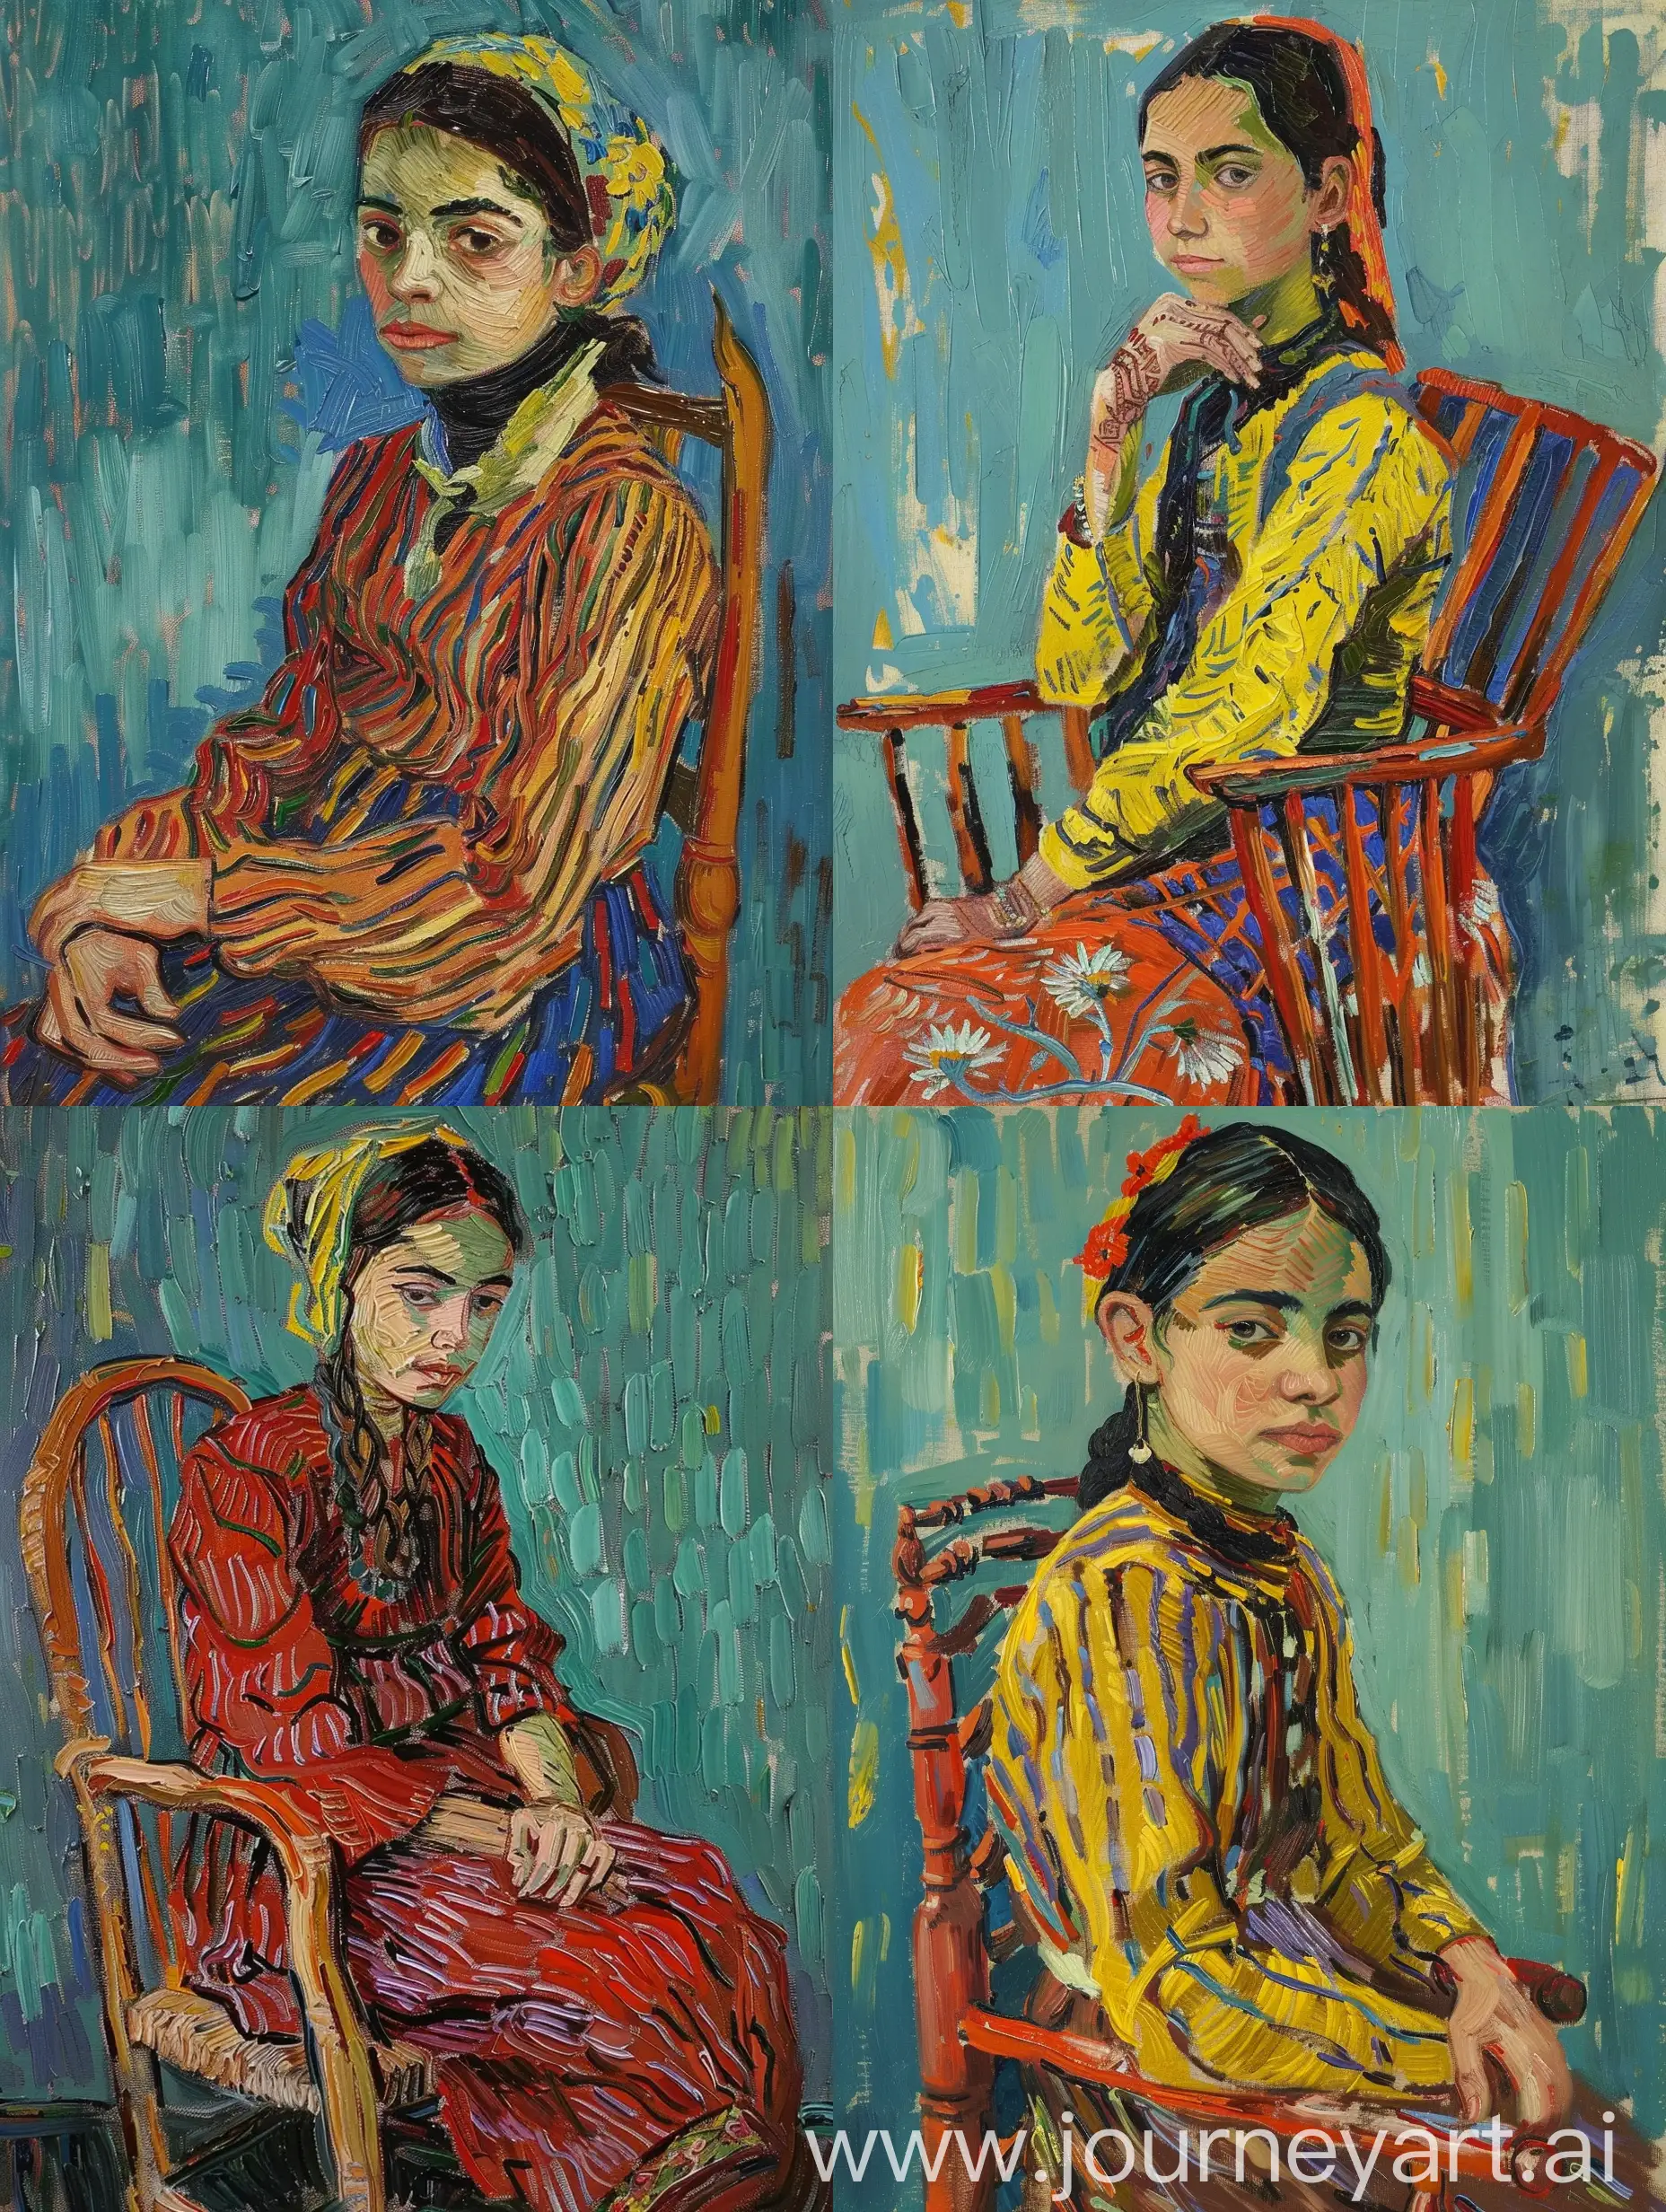 Kashmiri-Girl-Sitting-on-a-Chair-Vibrant-Oil-Painting-Inspired-by-Van-Gogh